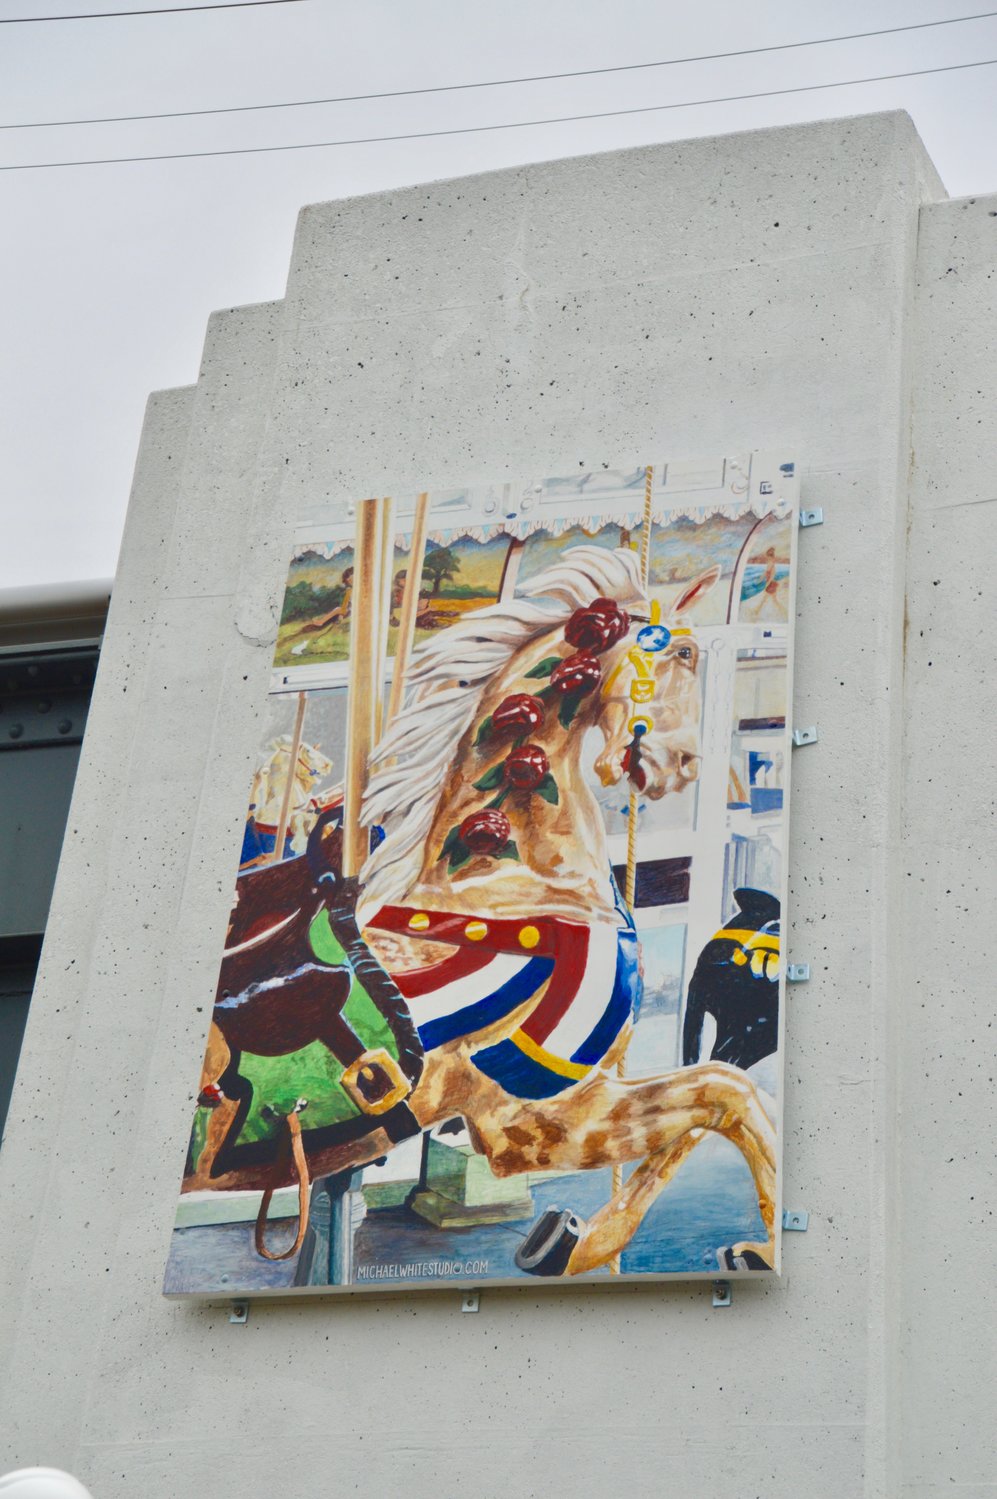 A mural of Nunley’s carousel, painted by Michael White, was mounted at Baldwin’s LIRR station on April 22.